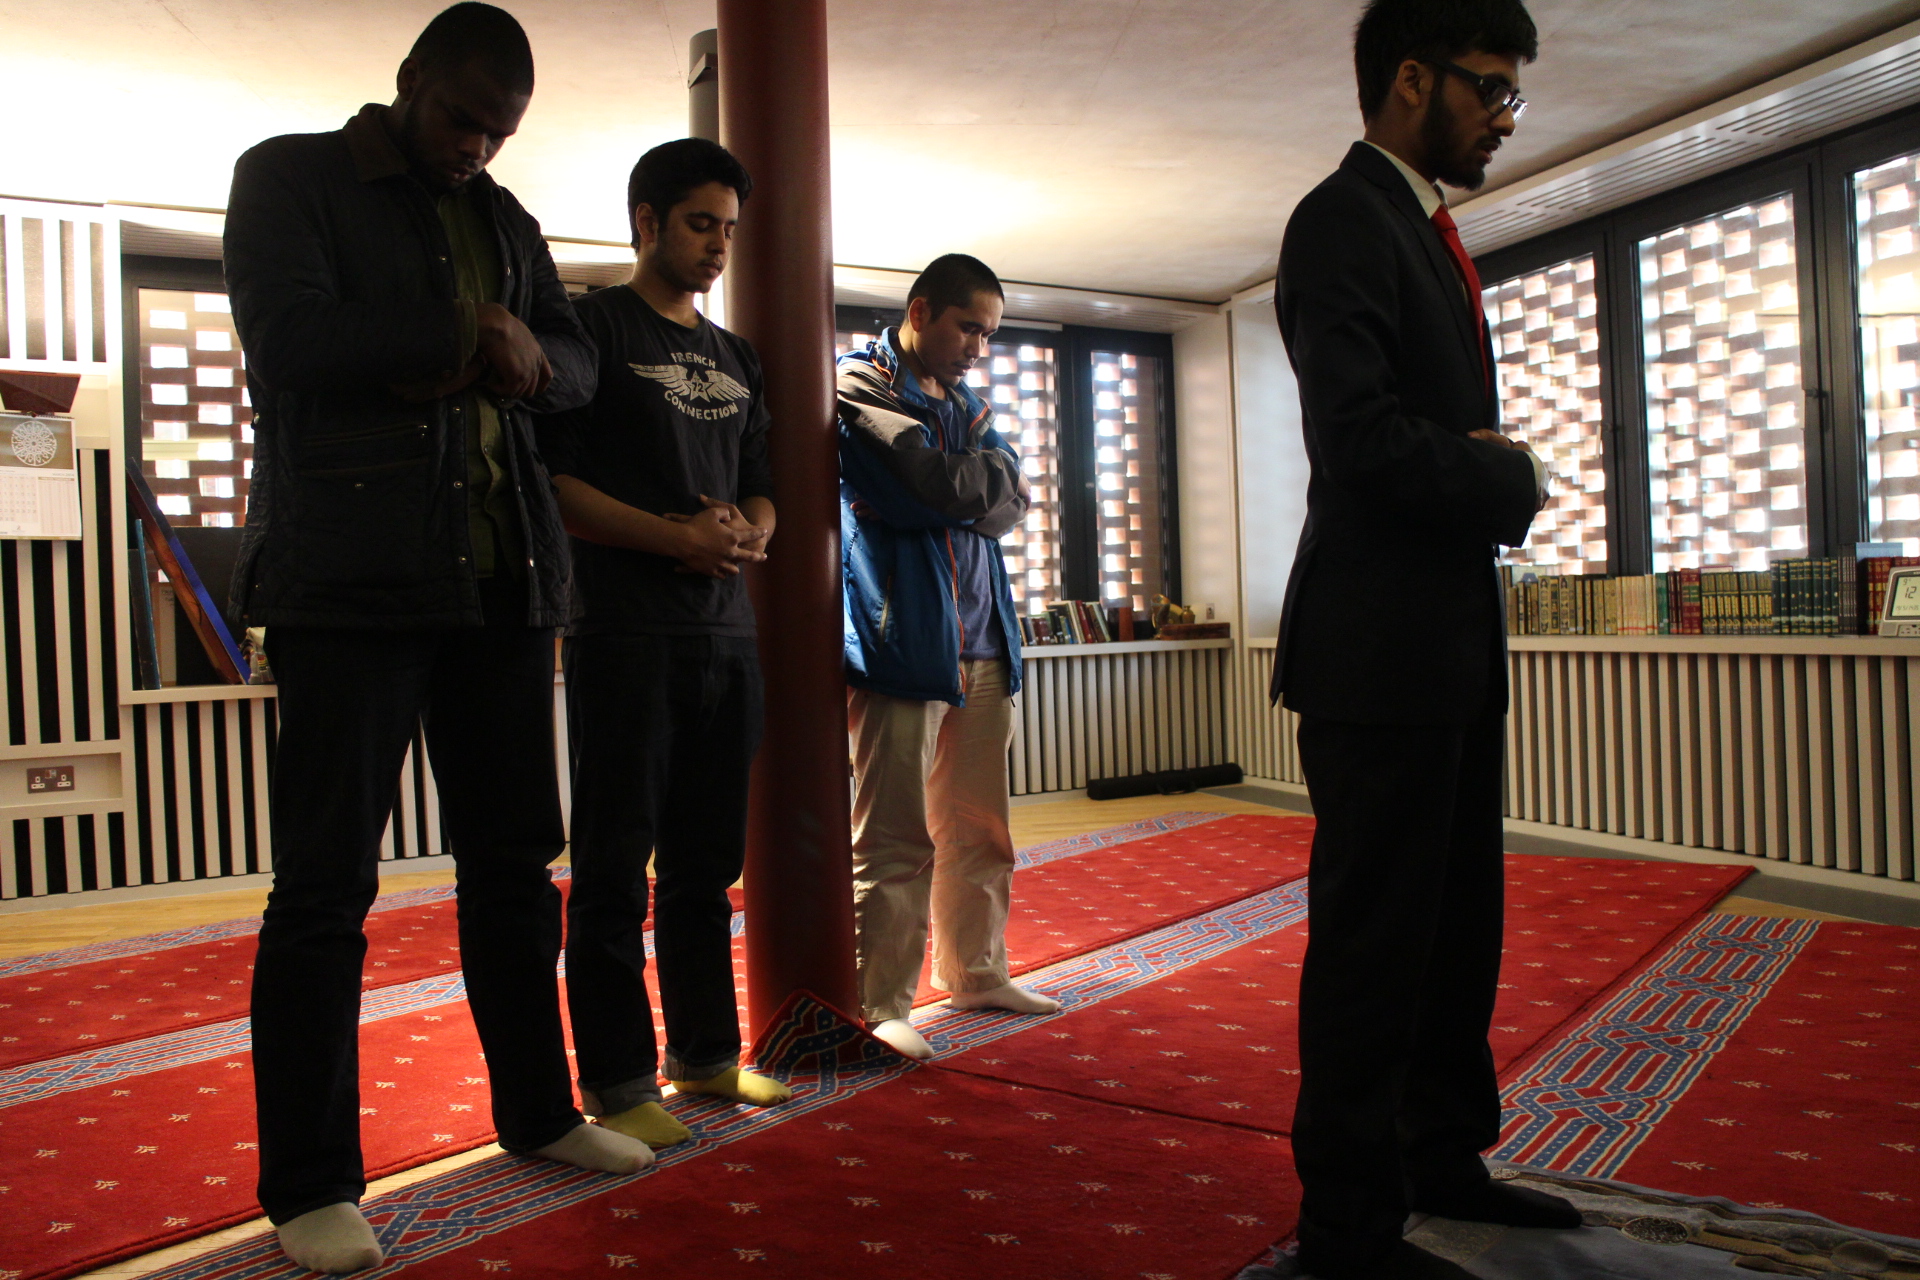 Four male Muslim students standing to pray in the prayer room